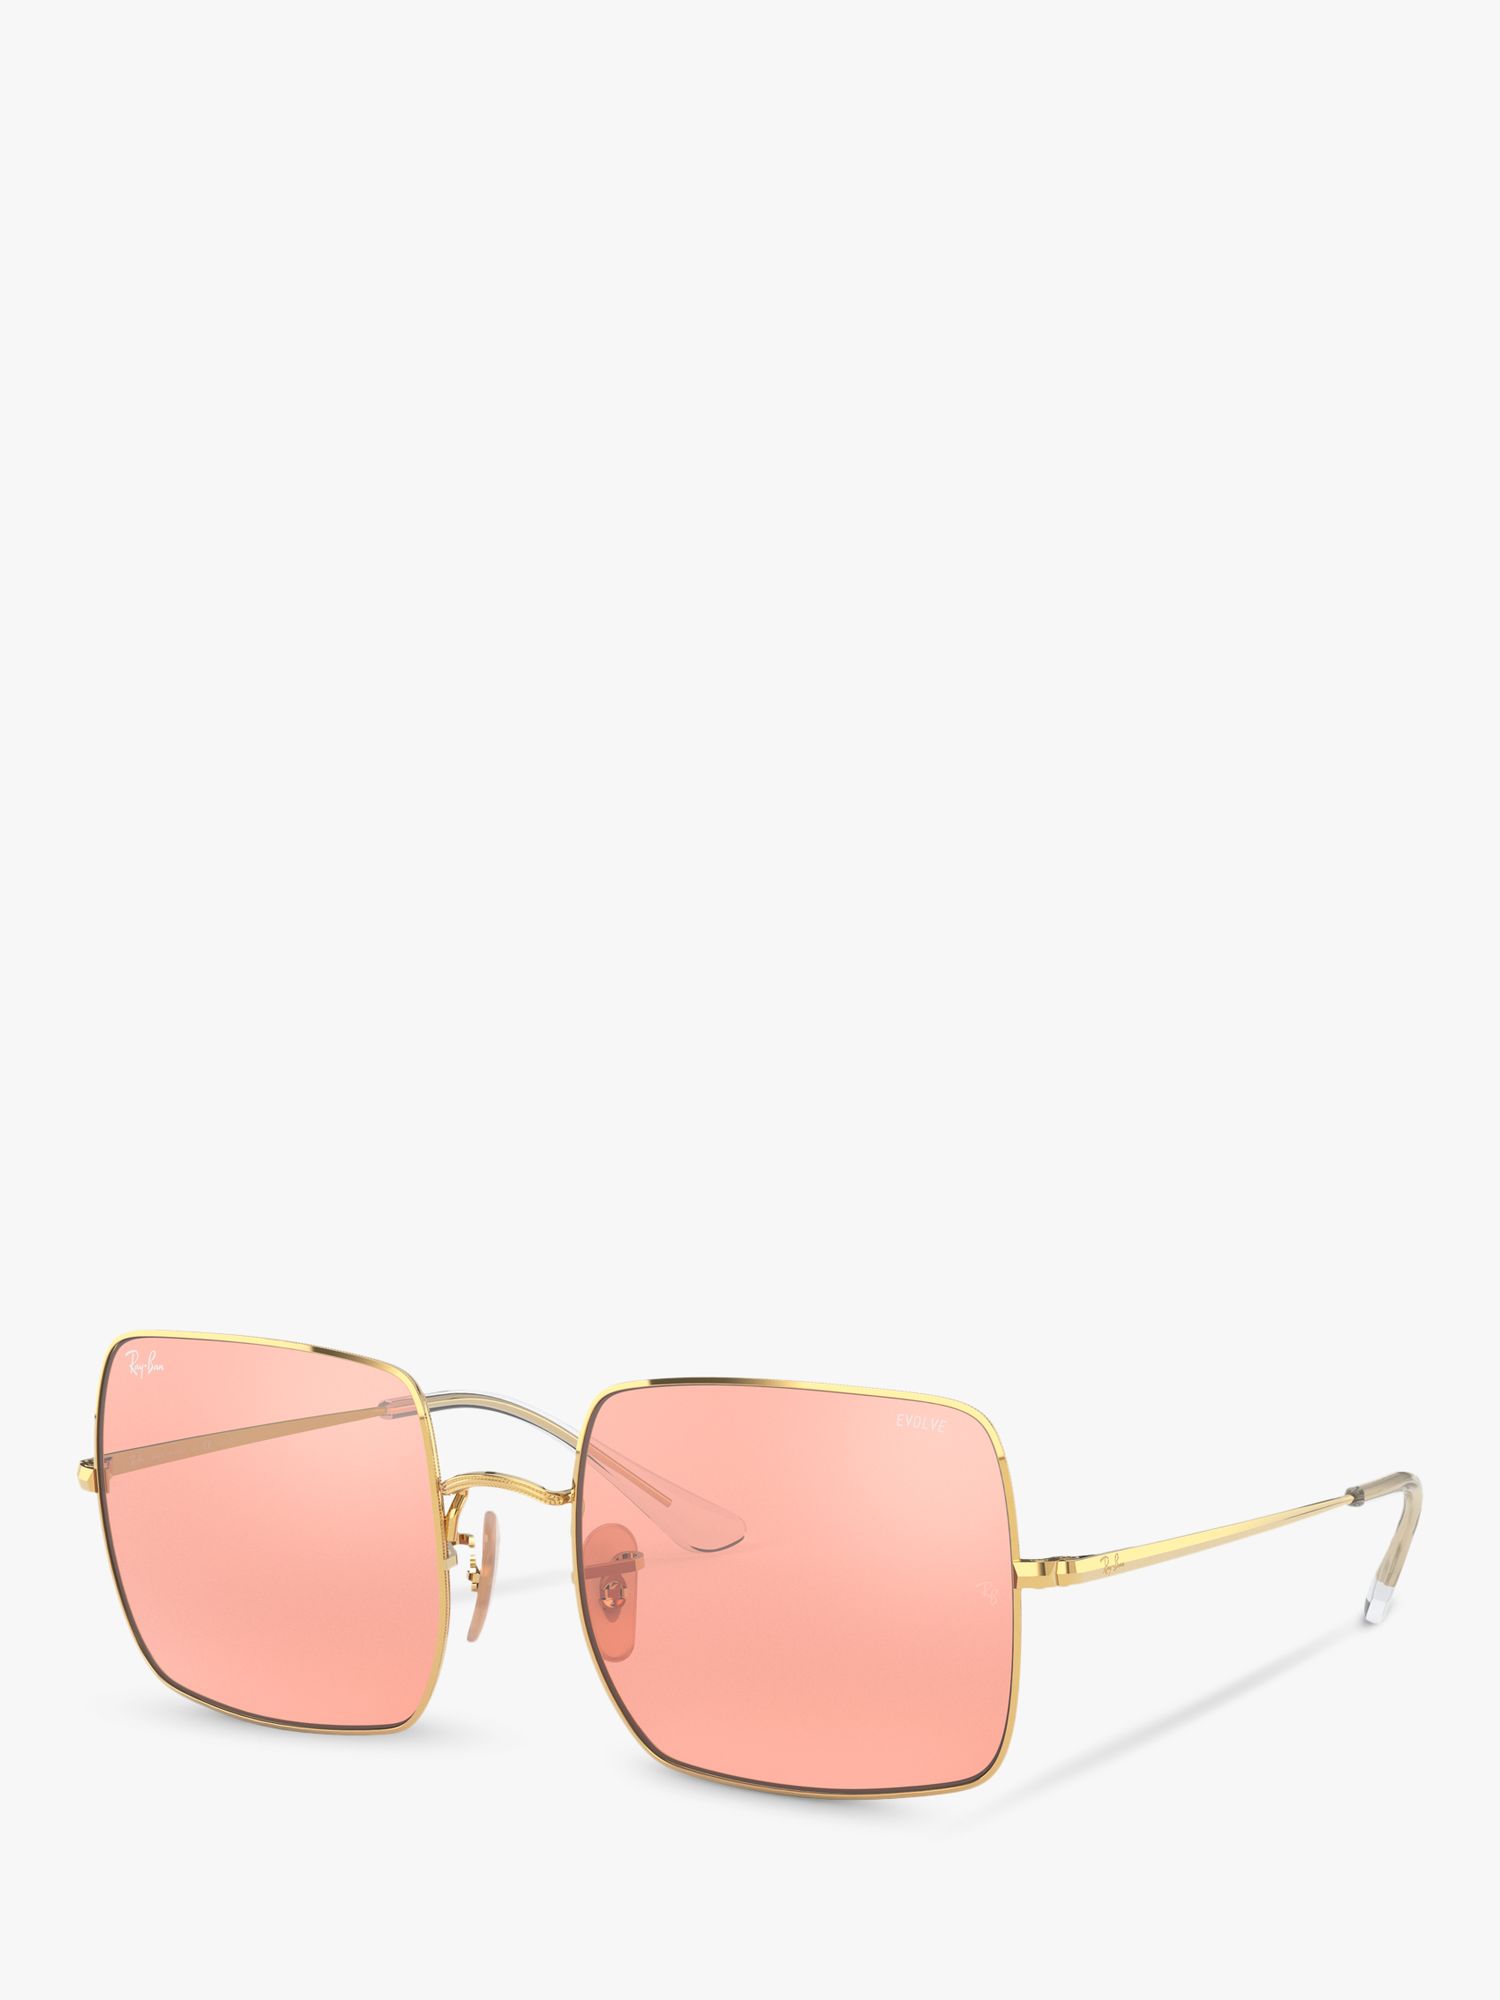 Ray-Ban RB1971 Unisex Square Sunglasses, Gold/Pink at John Lewis & Partners